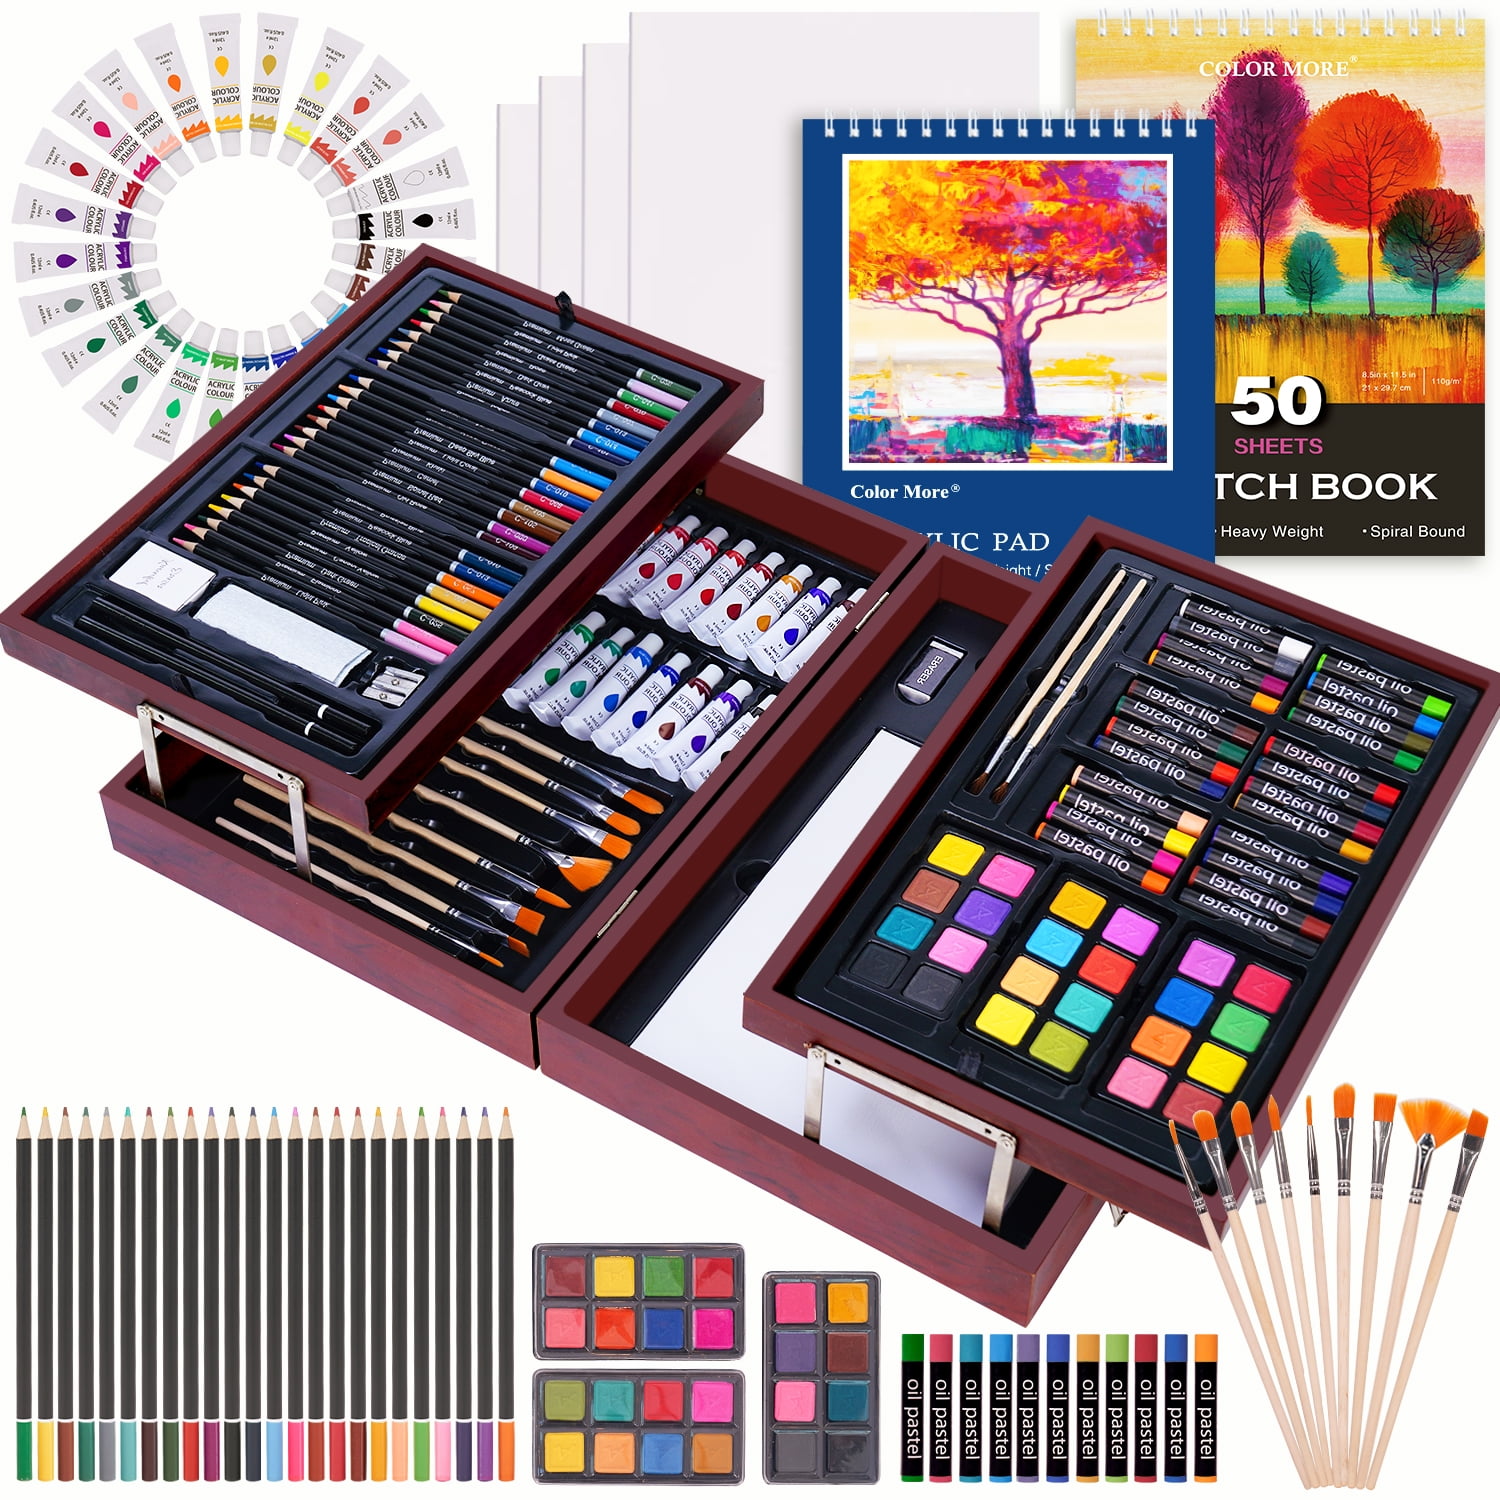  Hapikalor Art Supplies,156-Pack Deluxe Art Set Drawing Kit with  2 Sketch Book, Arts and Crafts, Art Supplies for Girls Ages 6-8 9-12 13 14 Year  Old Girl, Cool Christmas Birthday Gifts